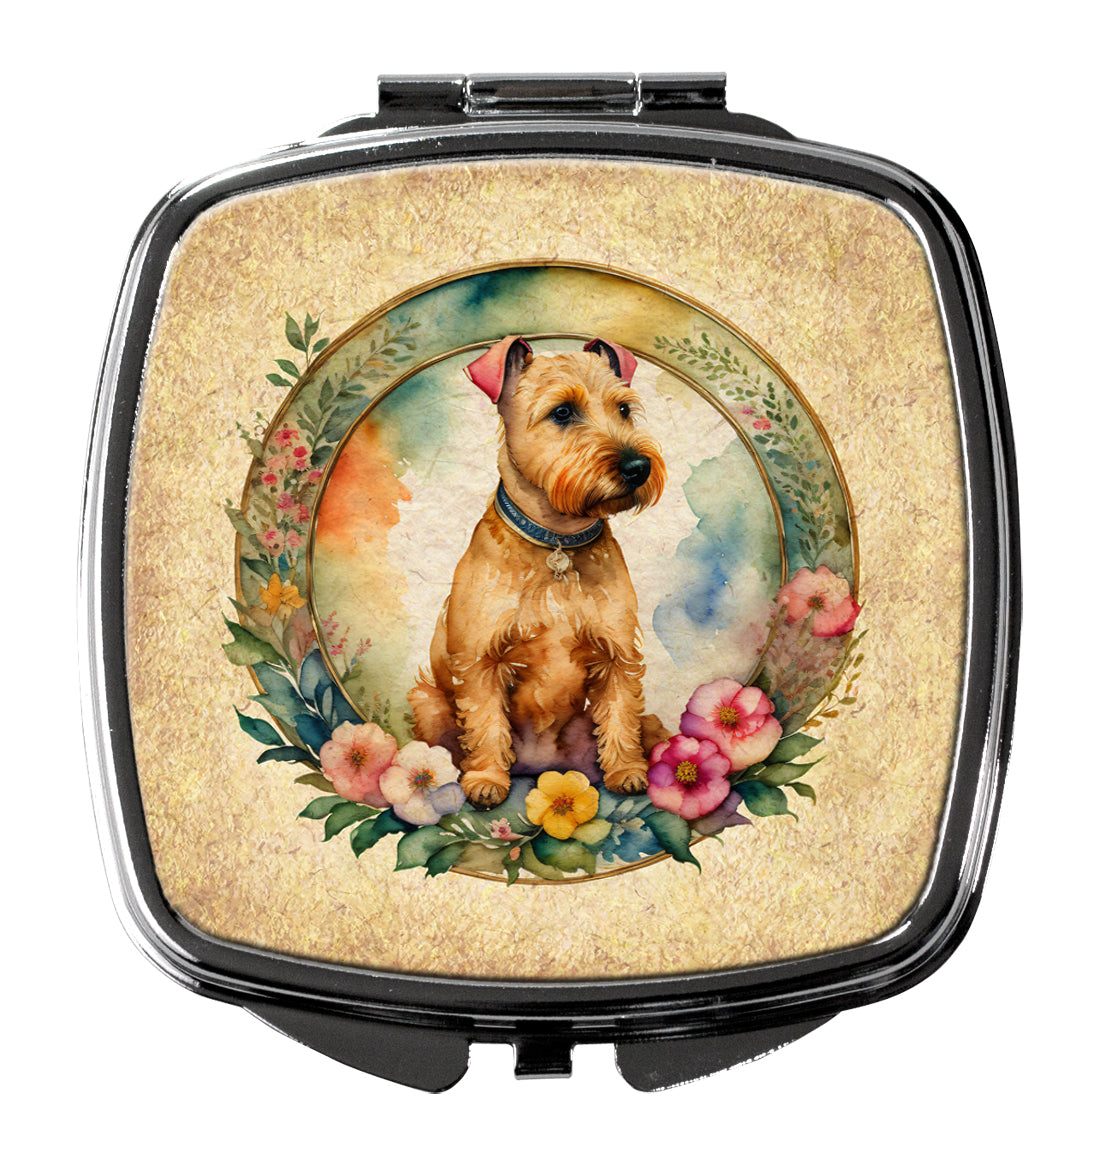 Buy this Lakeland Terrier and Flowers Compact Mirror